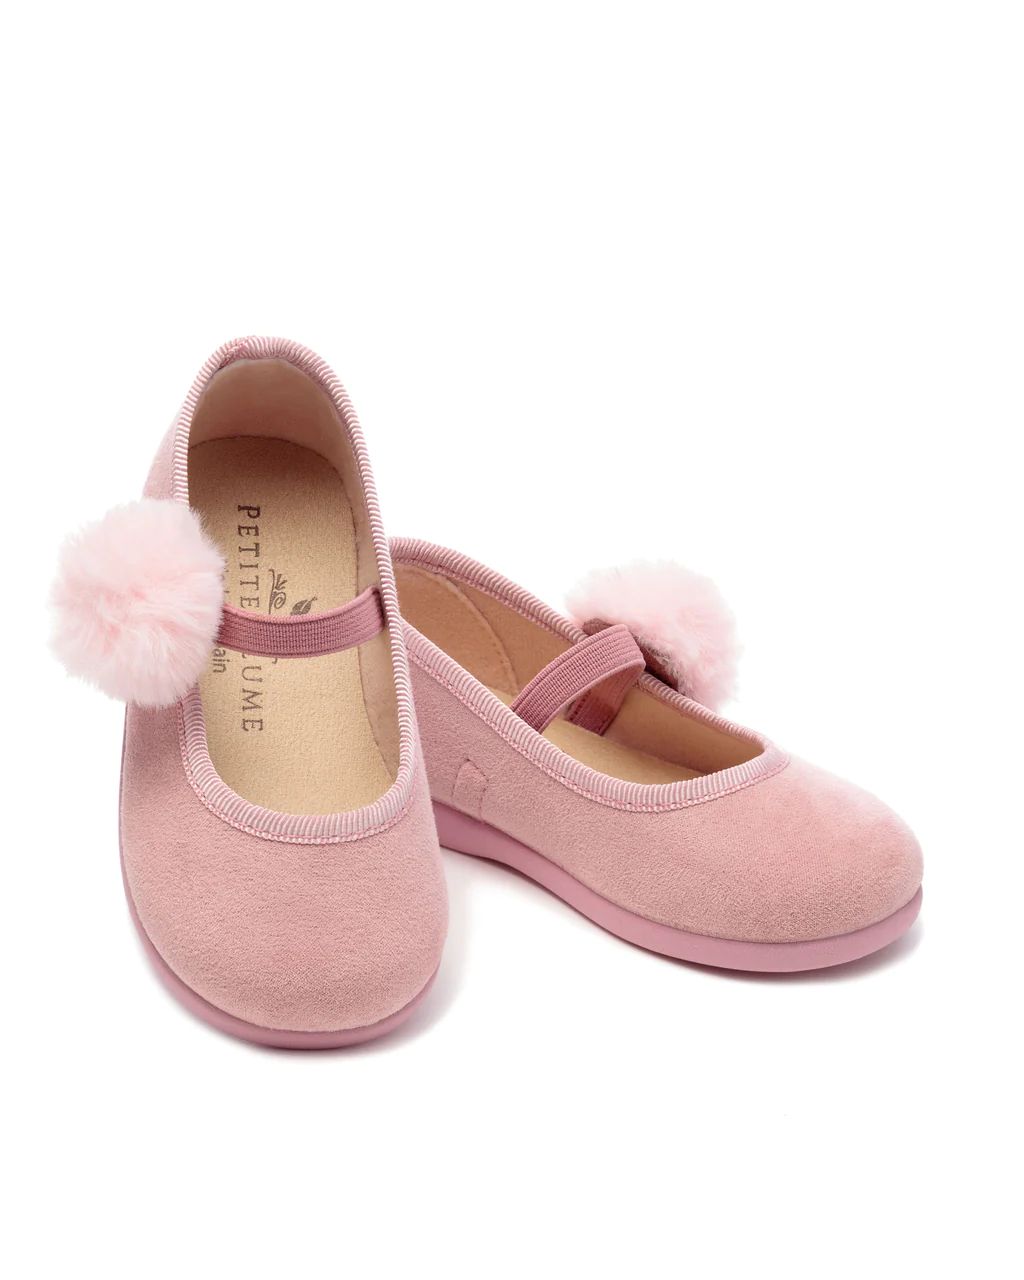 The Delphine Slipper in Antique Rose Suede with a Festive Pom | Petite Plume